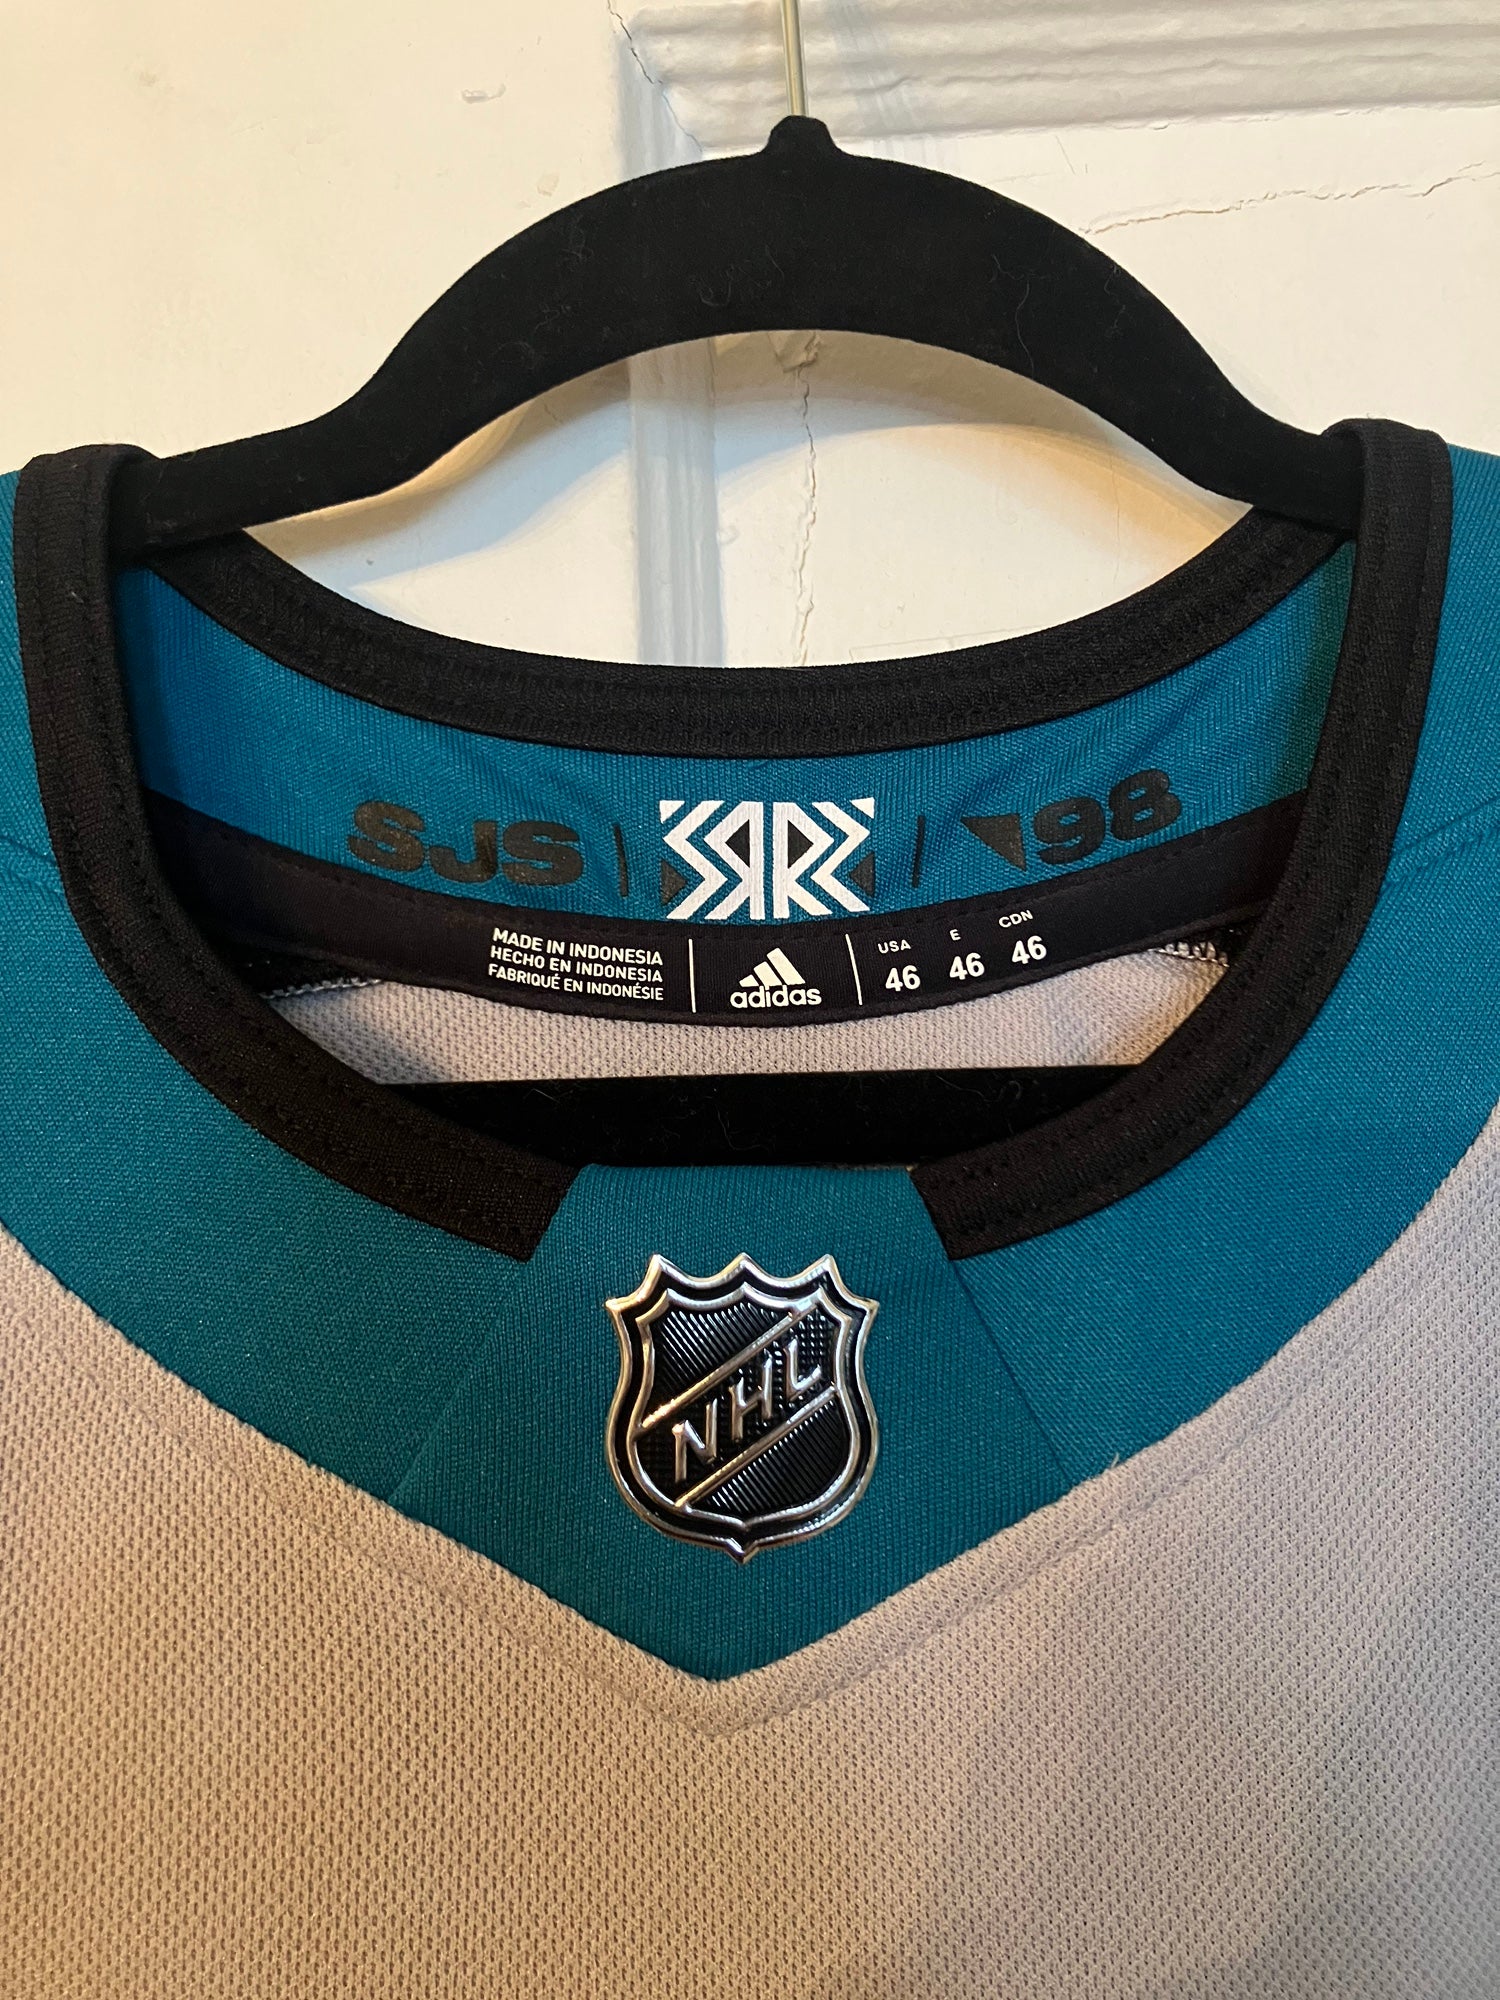 San Jose Sharks - Want to see our Reverse Retro debut? 🔄 🦭